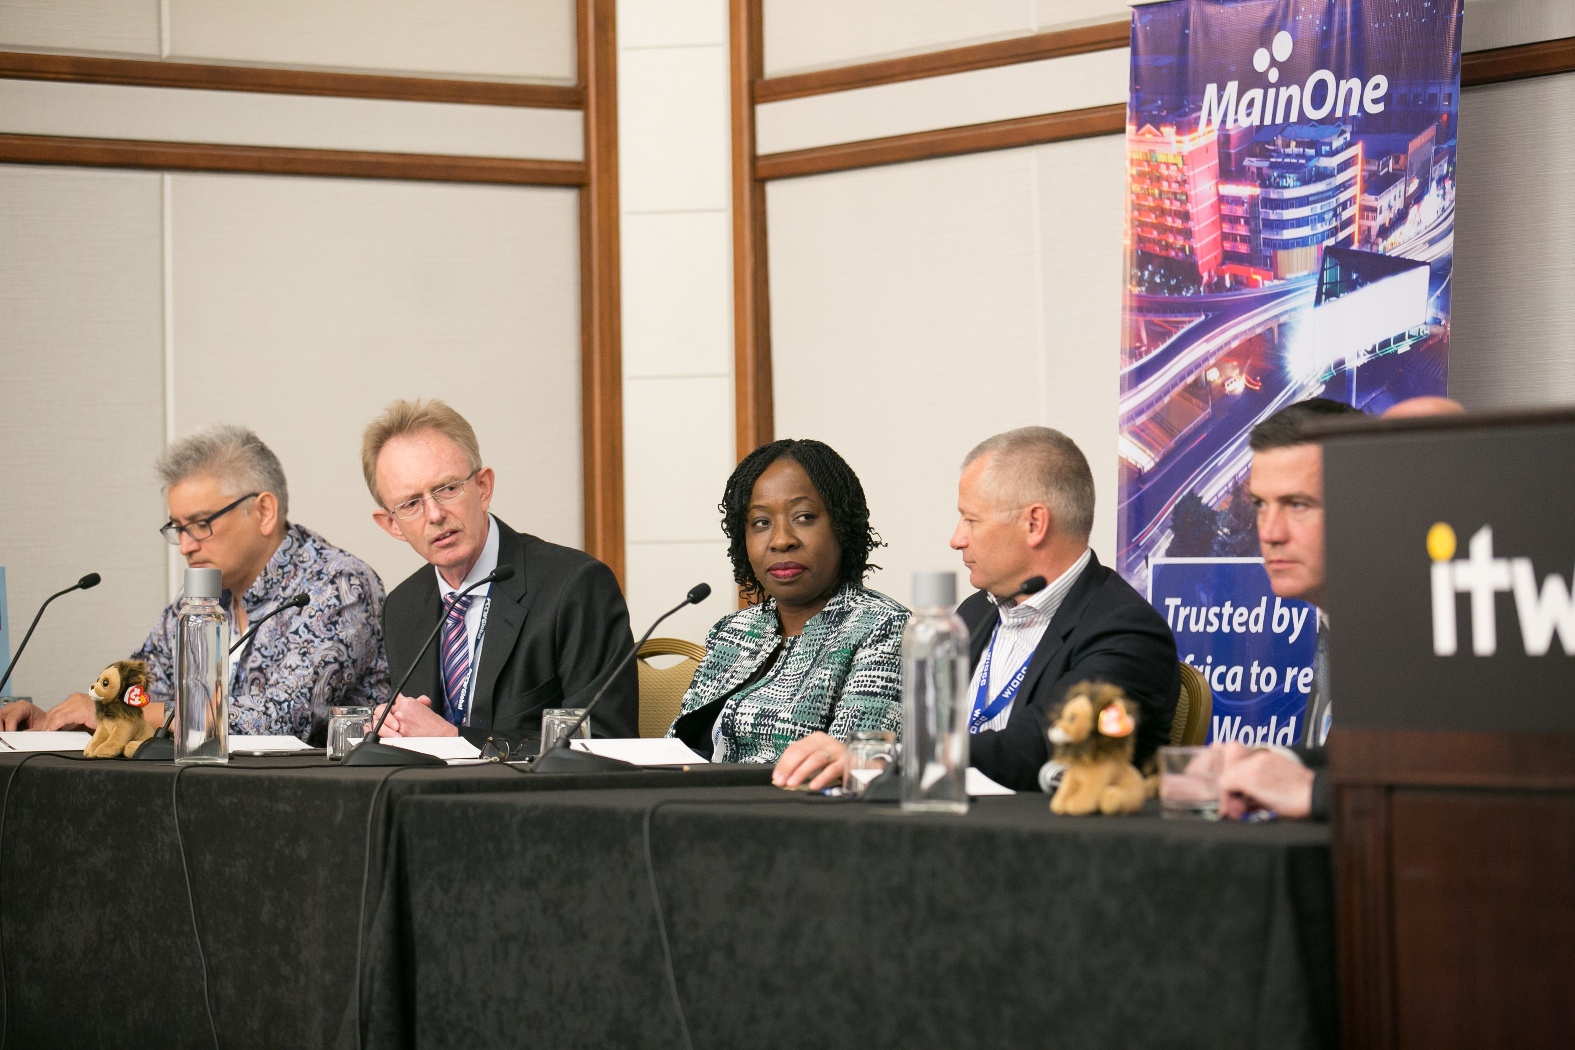 L-R: Chris George, Strategic Negotiator, Google; Mike van den Bergh, CMO, PCCW Global; Funke Opeke, CEO, MainOne; Chris Wood, CEO, WIOCC; Willem Marais, Group Managing Executive and CEO, Liquid Telecom SA, and Russell Southwood, CEO, Balancing Act, during the MainOne-hosted Africa Panel Session on “Unlocking Africa’s Digital Potential” at the 2016 International Telecoms Week, held in Chicago... this week.(Photo by Peter Wynn Thompson/www.peterthompsonphoto.com)